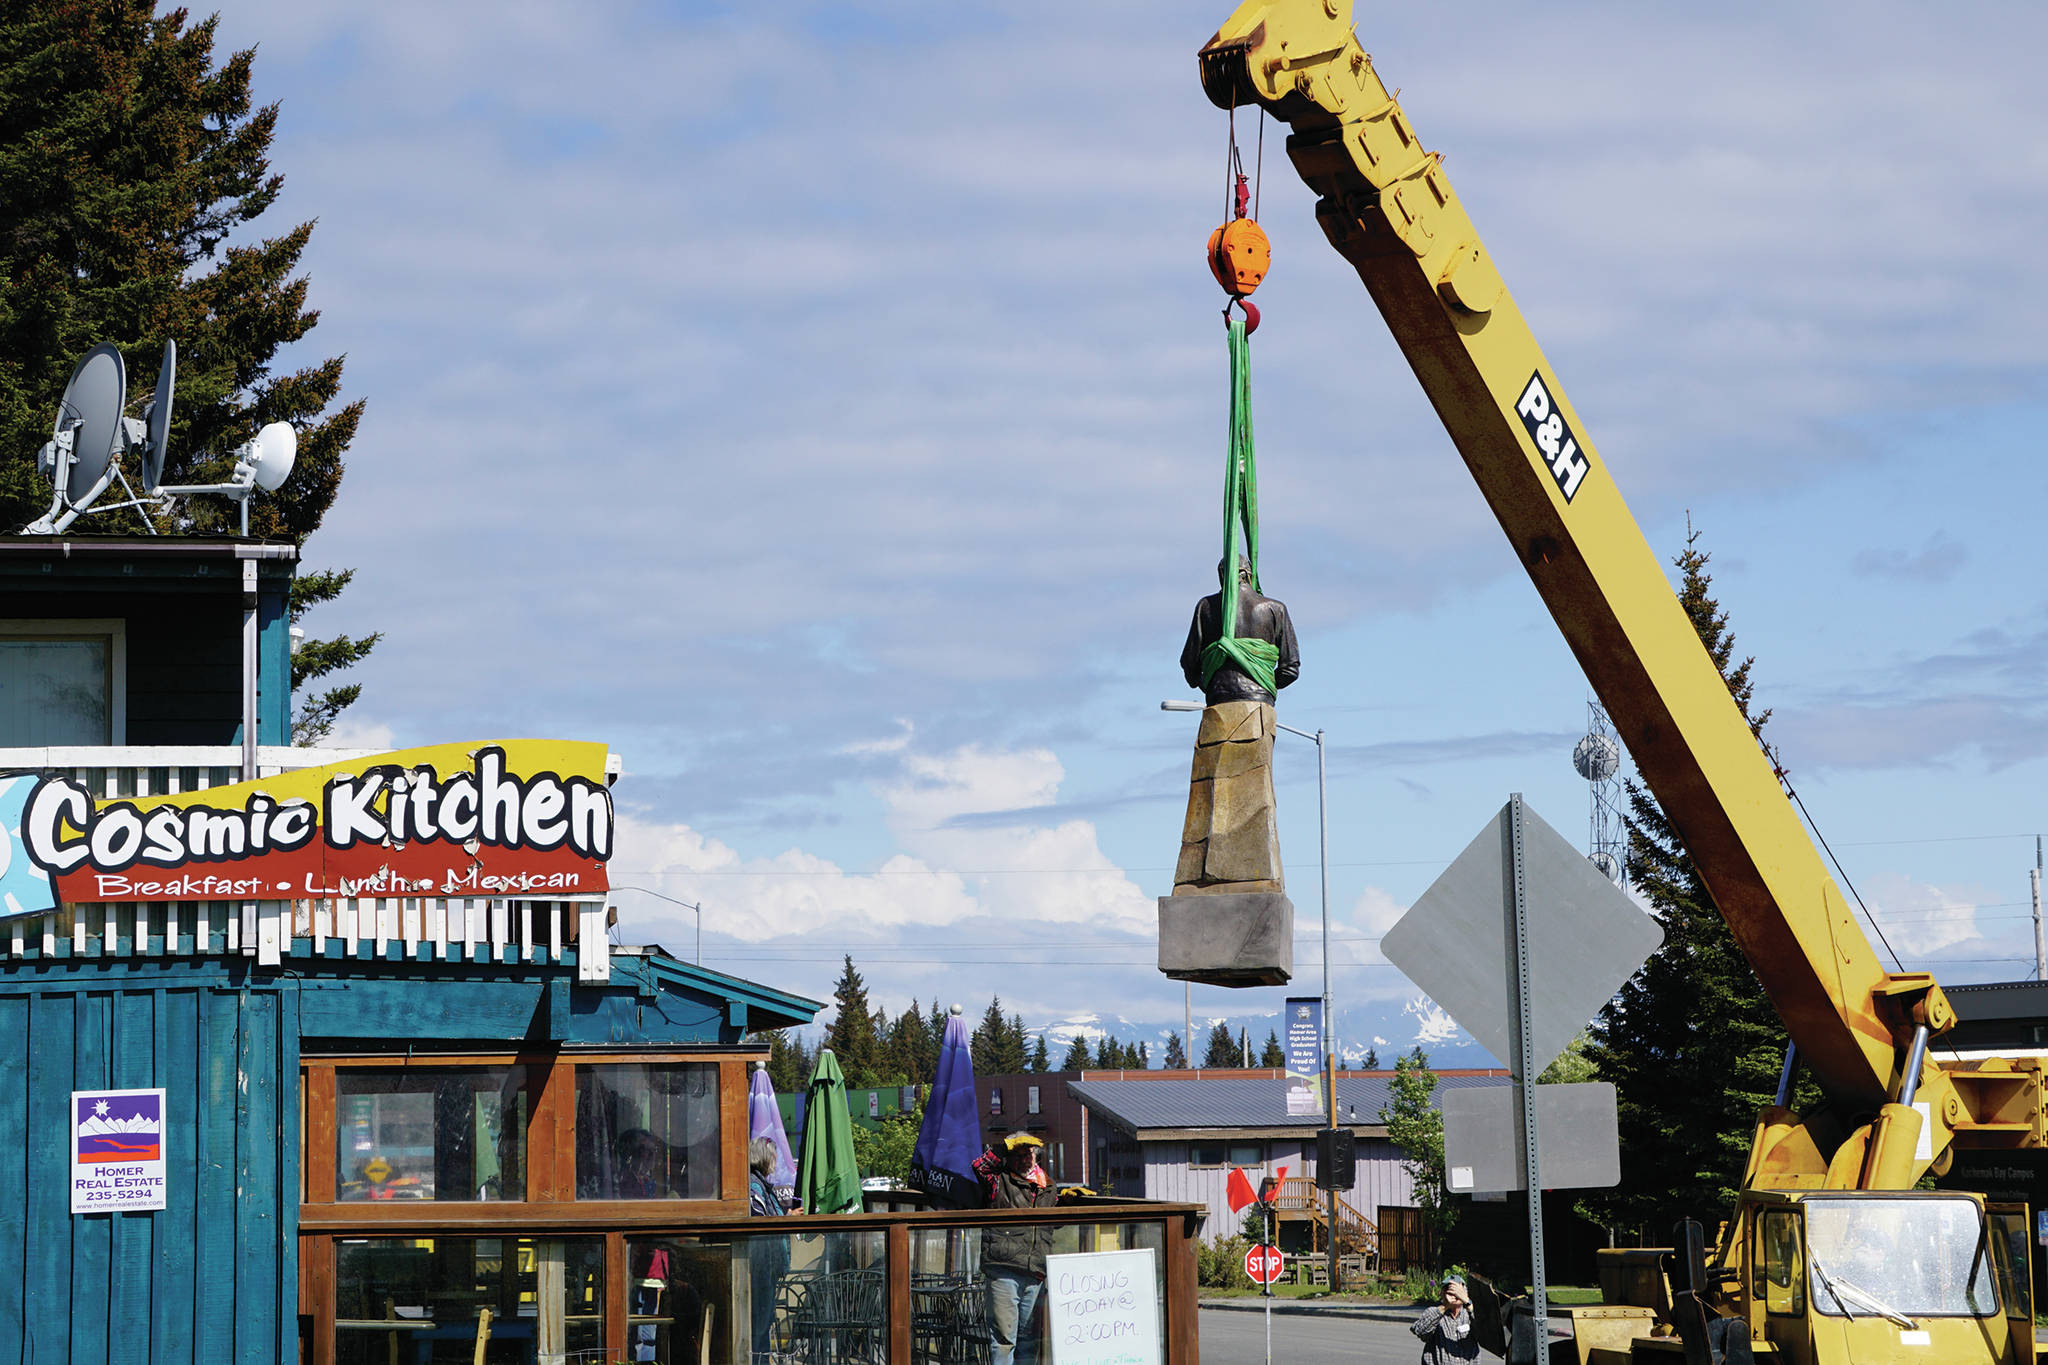 Mike Kennedy, in the crane at right, raises the Brother Asaiah statue from the deck of Cosmic Kitchen on Saturday, June 6, 2020, in Homer, Alaska. Leo Vait, left, on the deck, created the statue as a commission by John Nazarian, a friend of Asaiah Bates. Nazarian had loaned to the Pioneer Avenue restaurant the statue of the man who coined the phrase “Cosmic Hamlet by the Sea” to describe Homer. The statue was moved after Cosmic Kitchen owners Michelle Wilson and Sean Hogan sold their restaurant. Cosmic Kitchen closed on Saturday. The Asaiah statue will be stored until a new location can be found. (Photo by Michael Armstrong/Homer News)